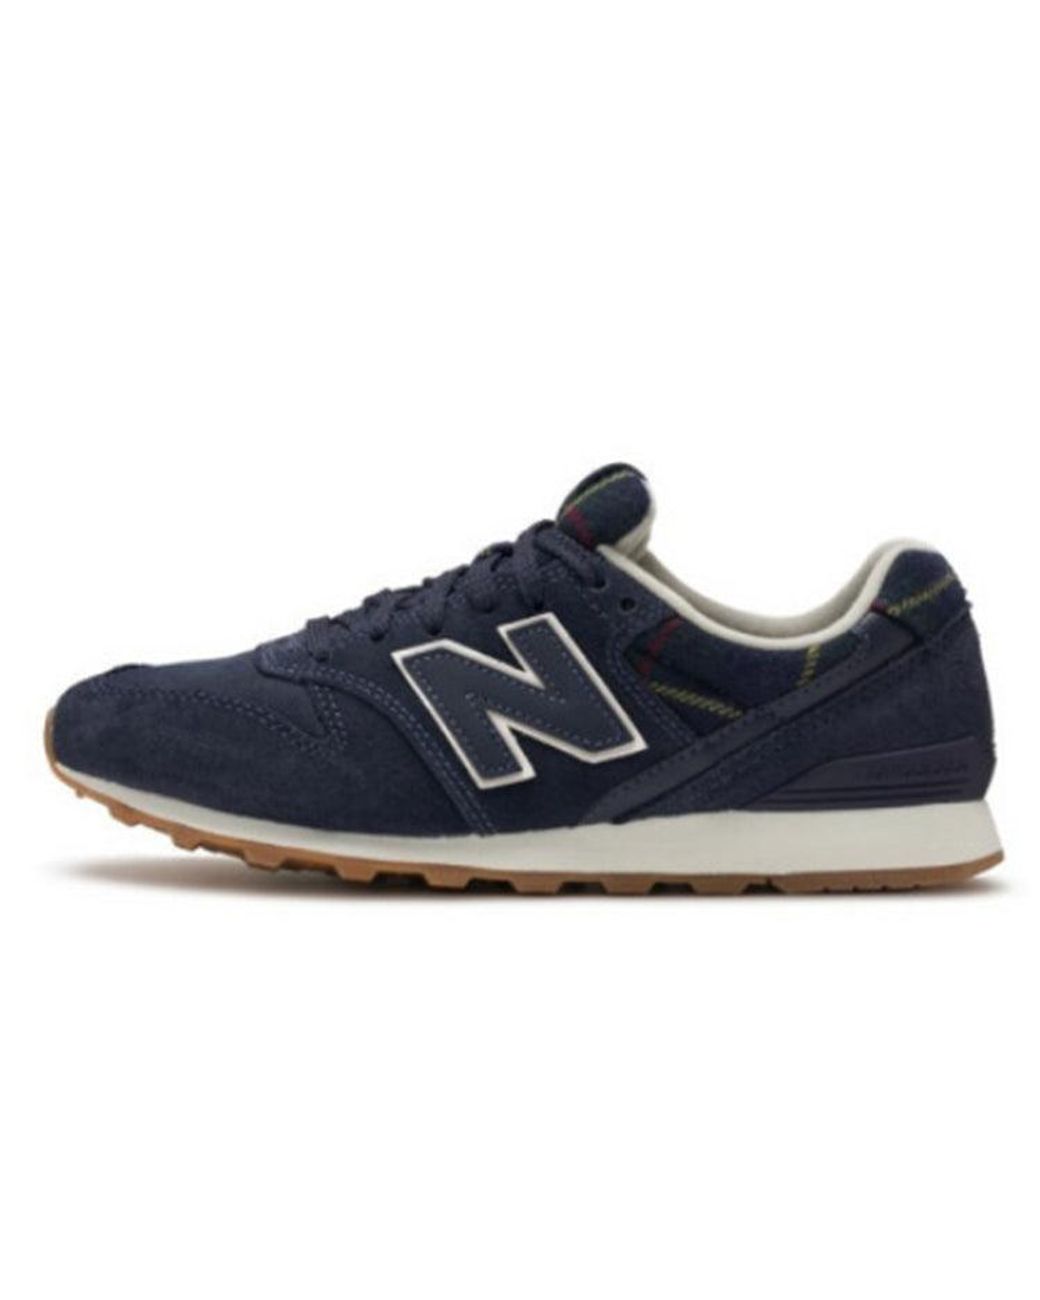 New Balance 996 Series Casual Sports Navy Blue | Lyst